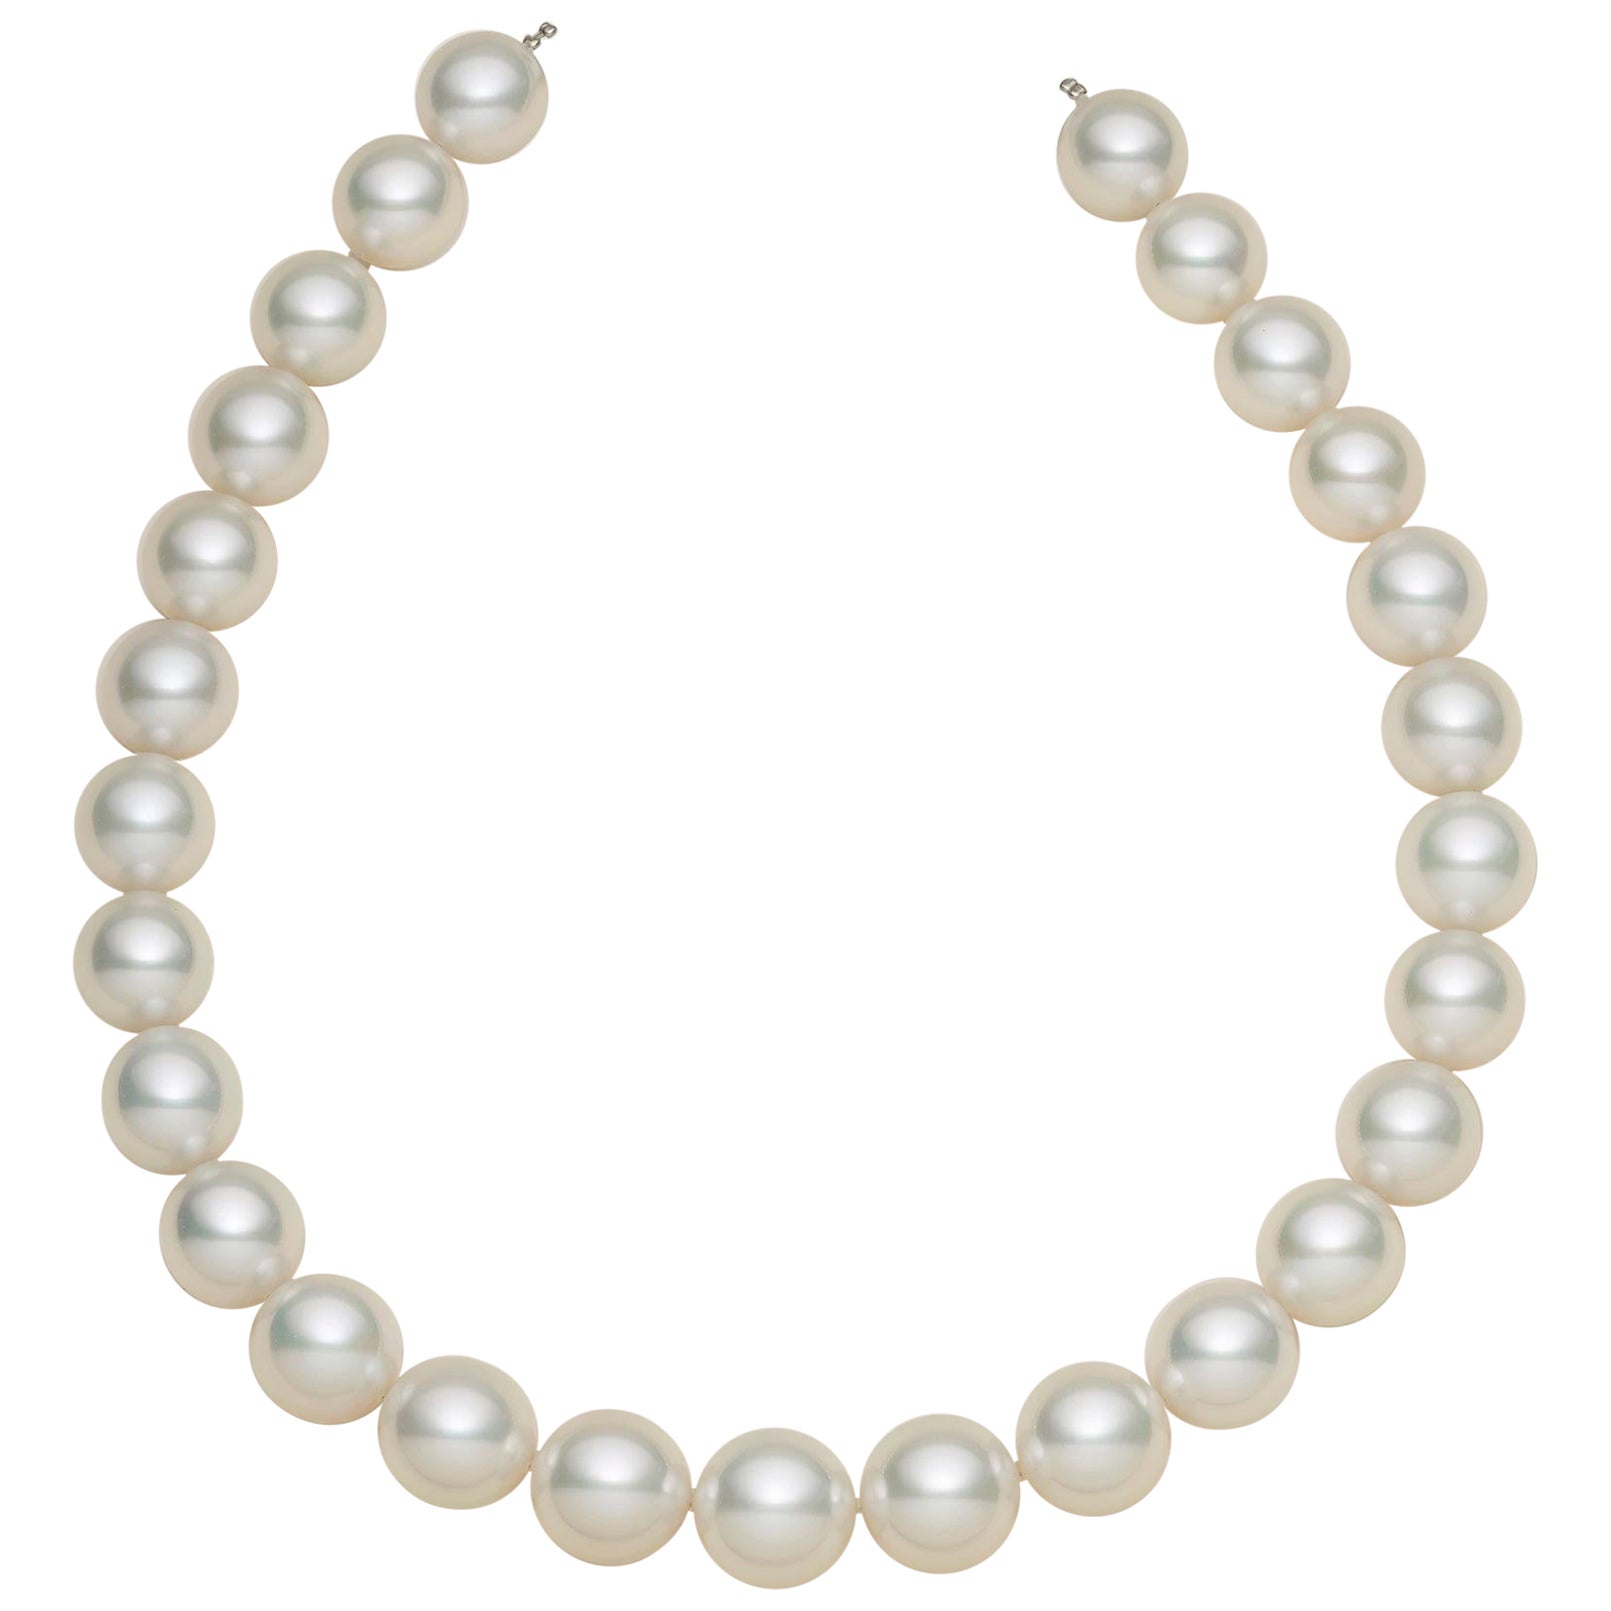 Eostre Nearly Round Australian South Sea Pearls Strand For Sale